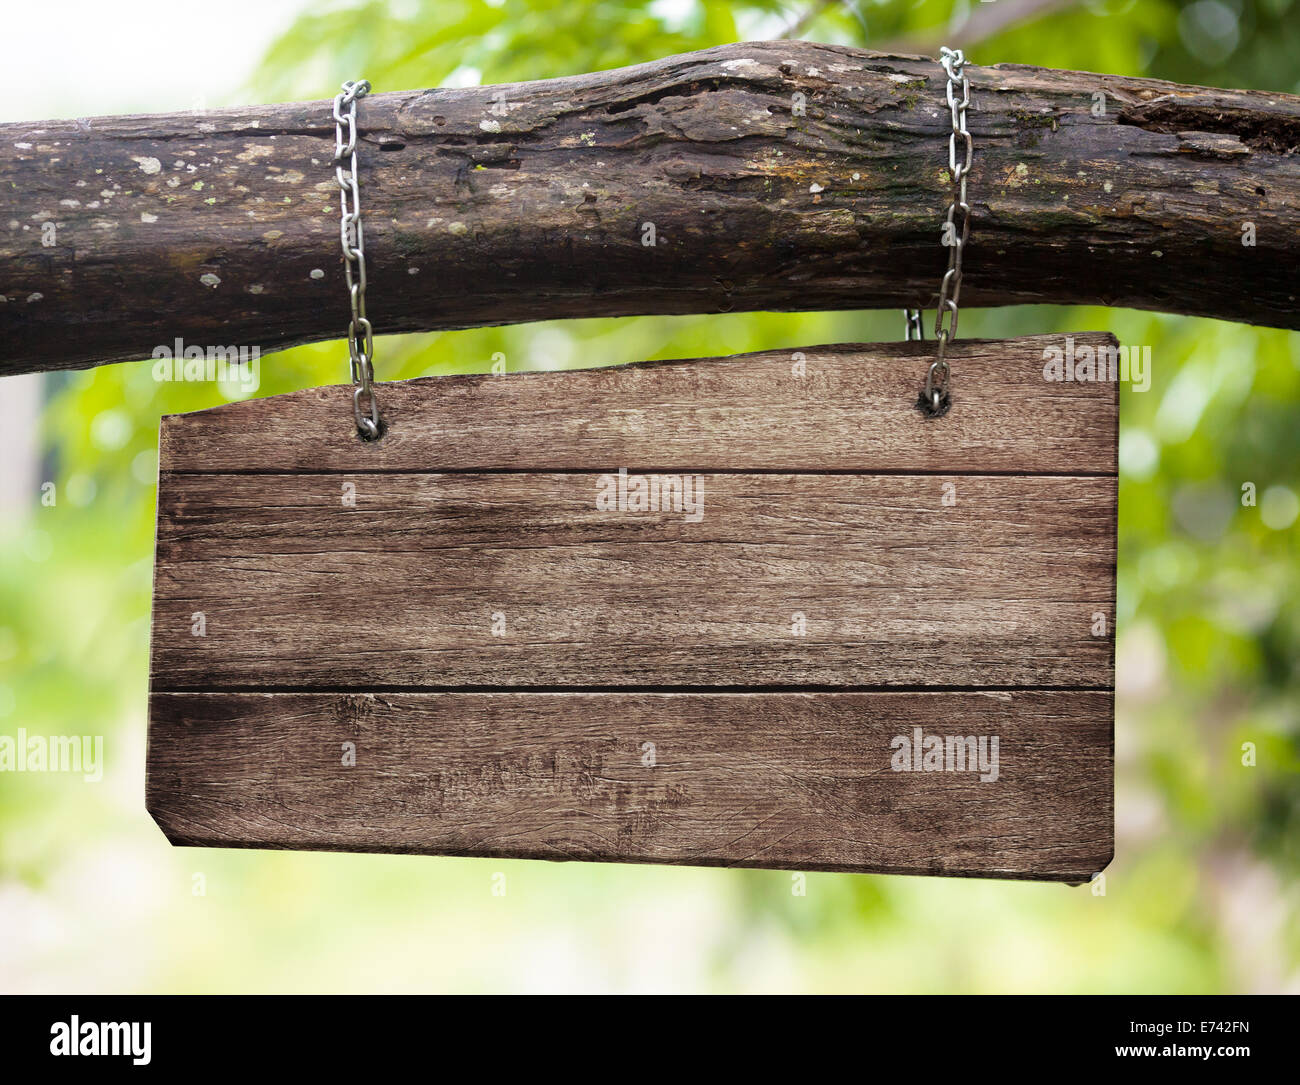 blank wooden sign board hanging on branch Stock Photo